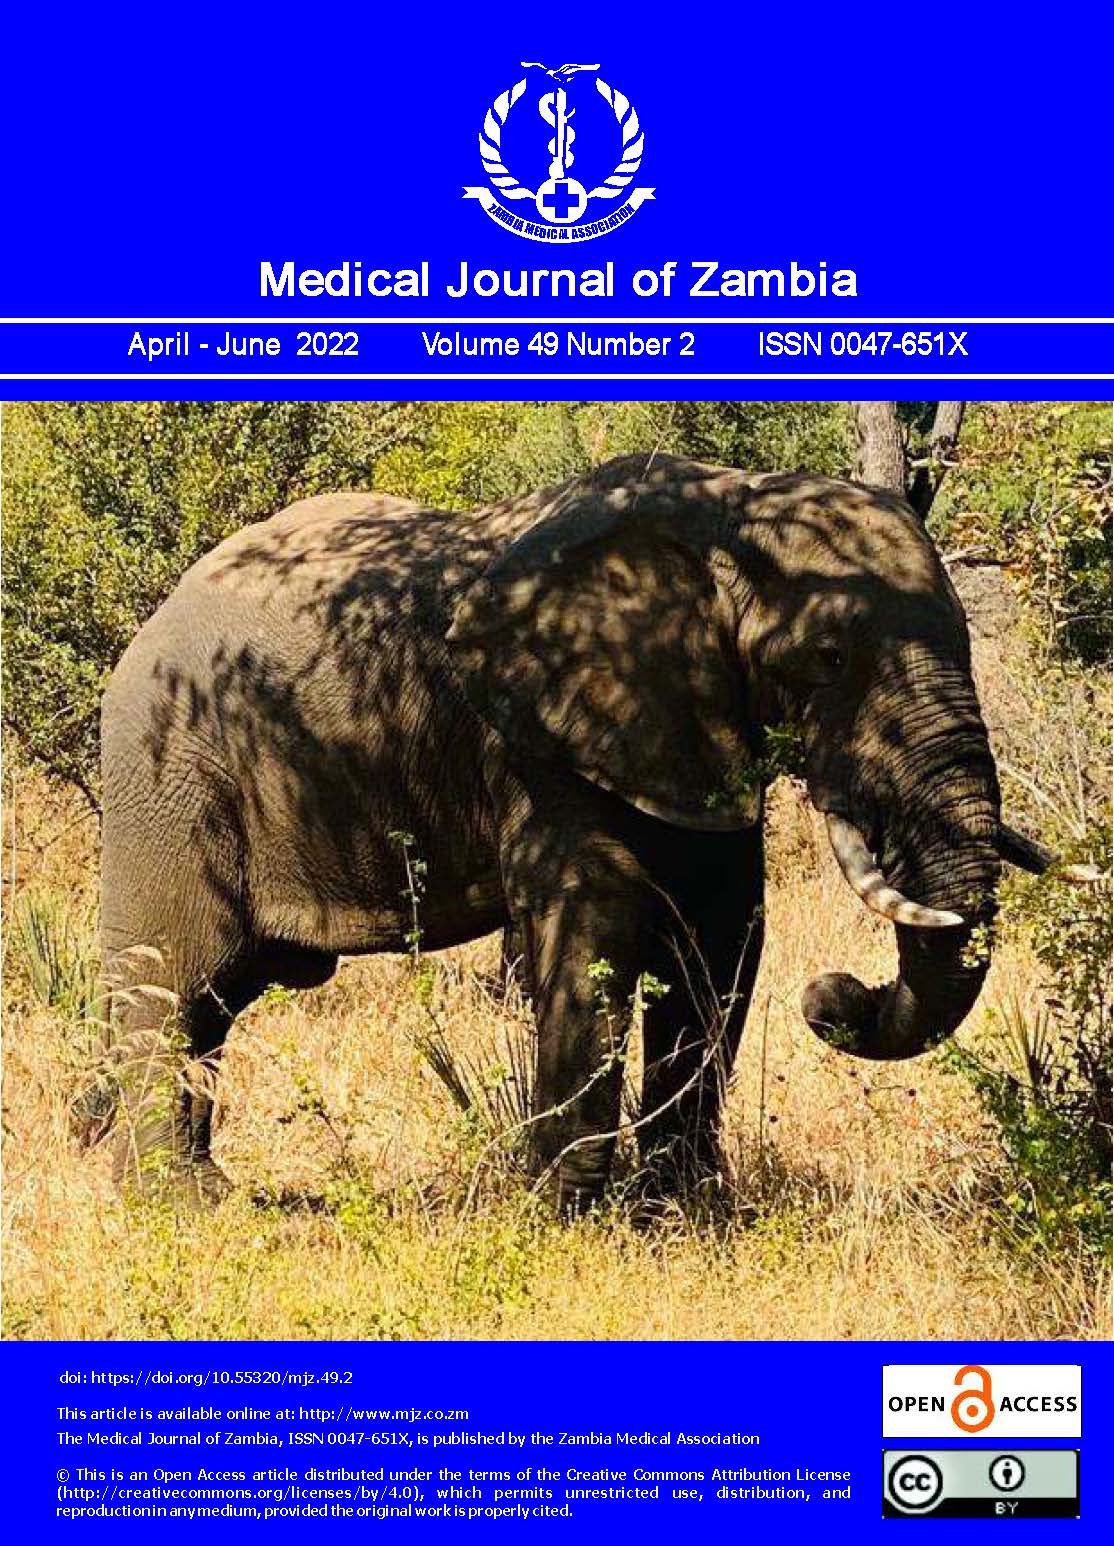 Medical Journal of Zambia Volume 49 Number 2